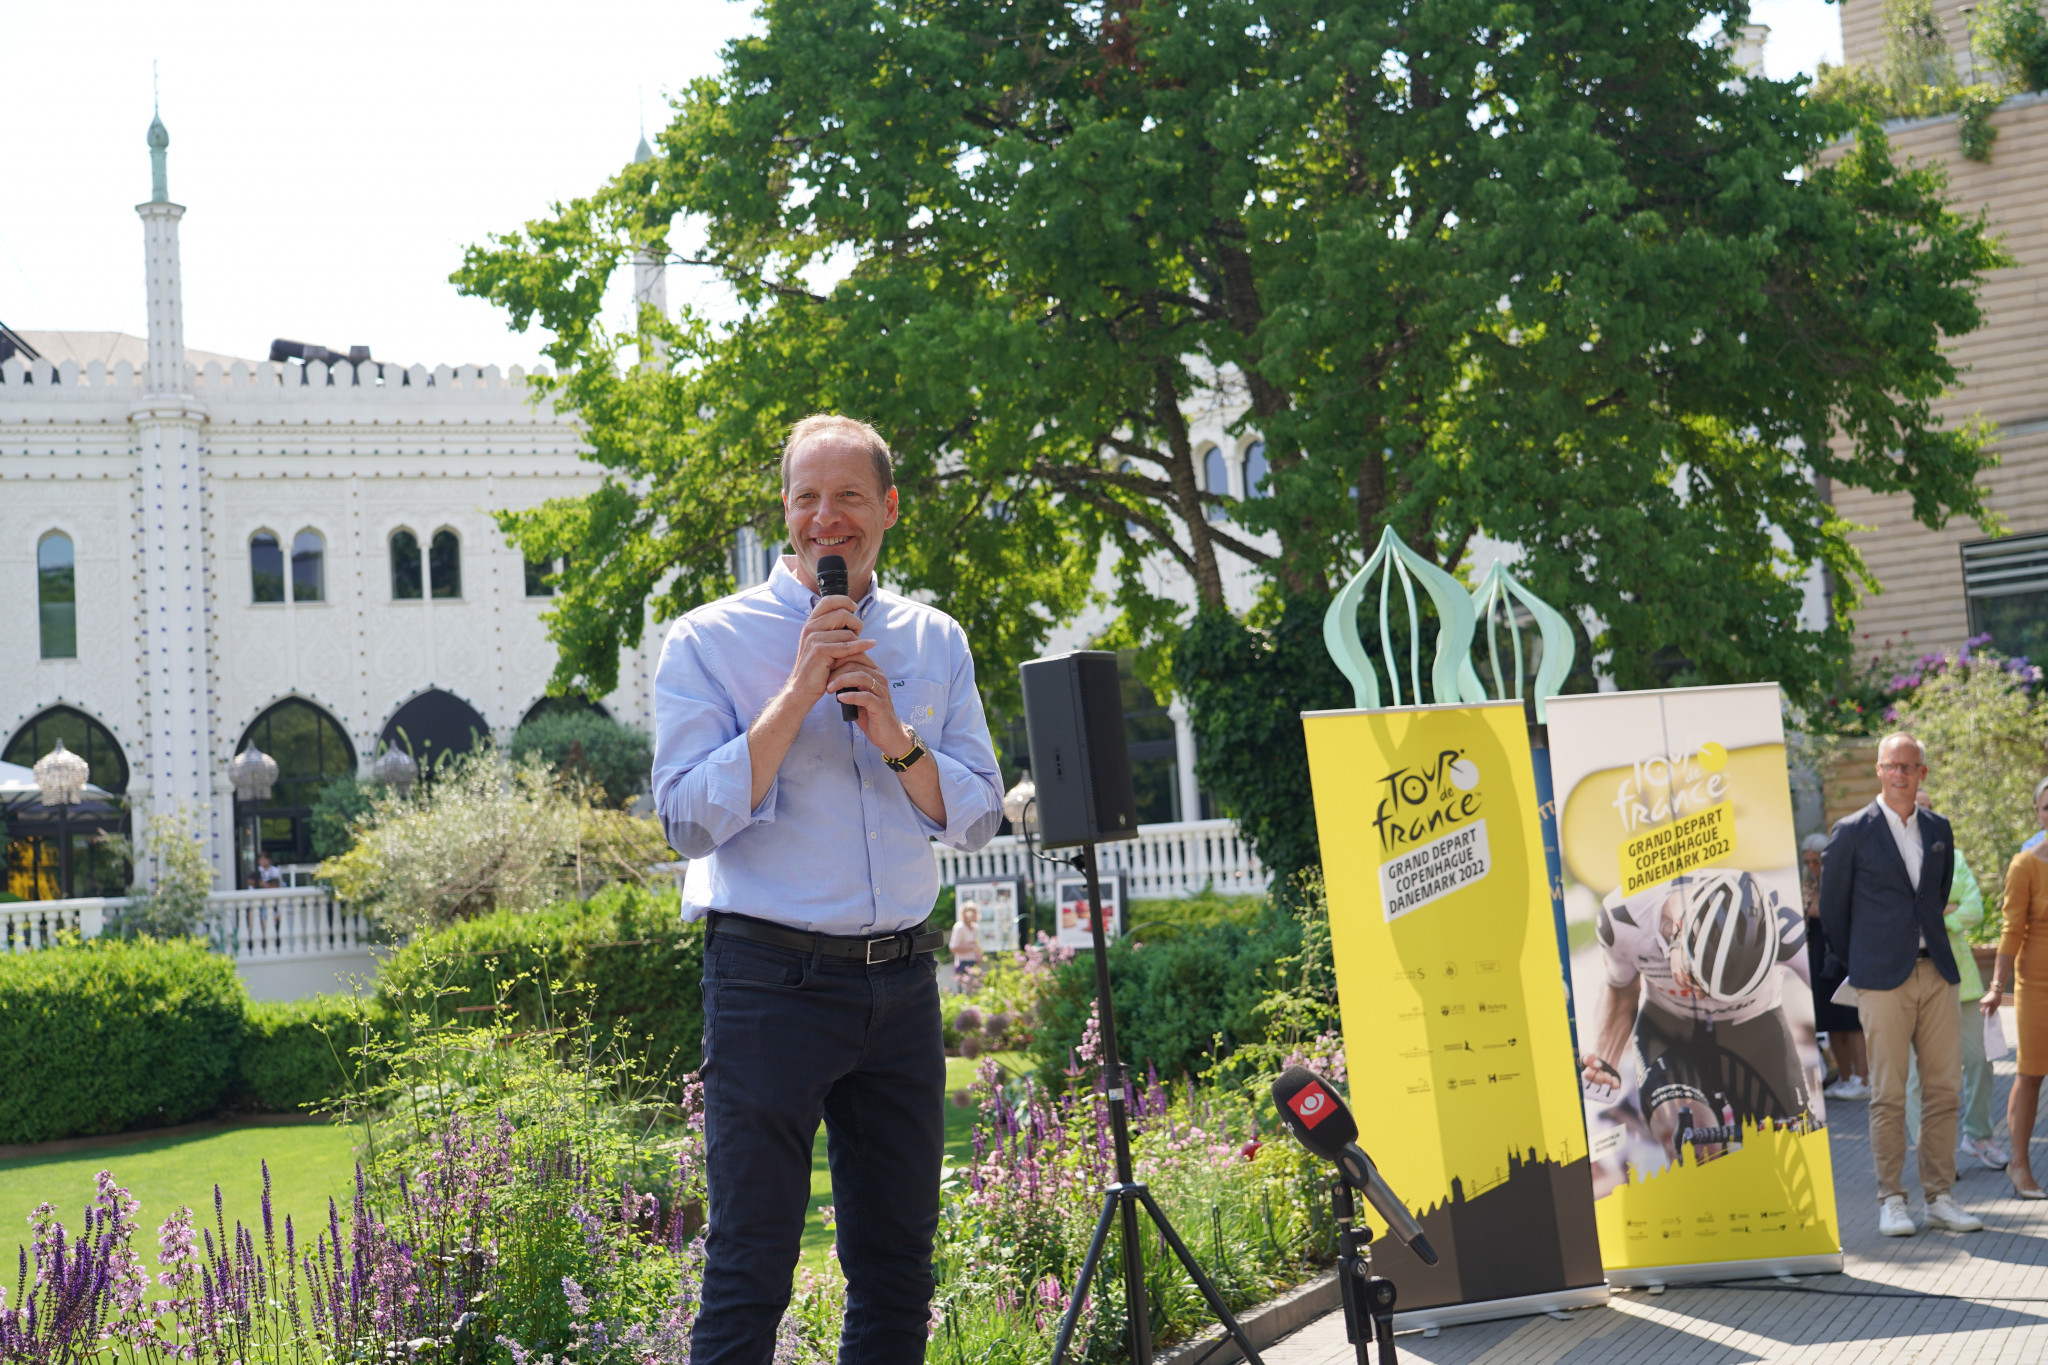 Tour de France general director Christian Prudhomme has called on roadside spectators to adhere to safety guidance ©Grand Depart DK